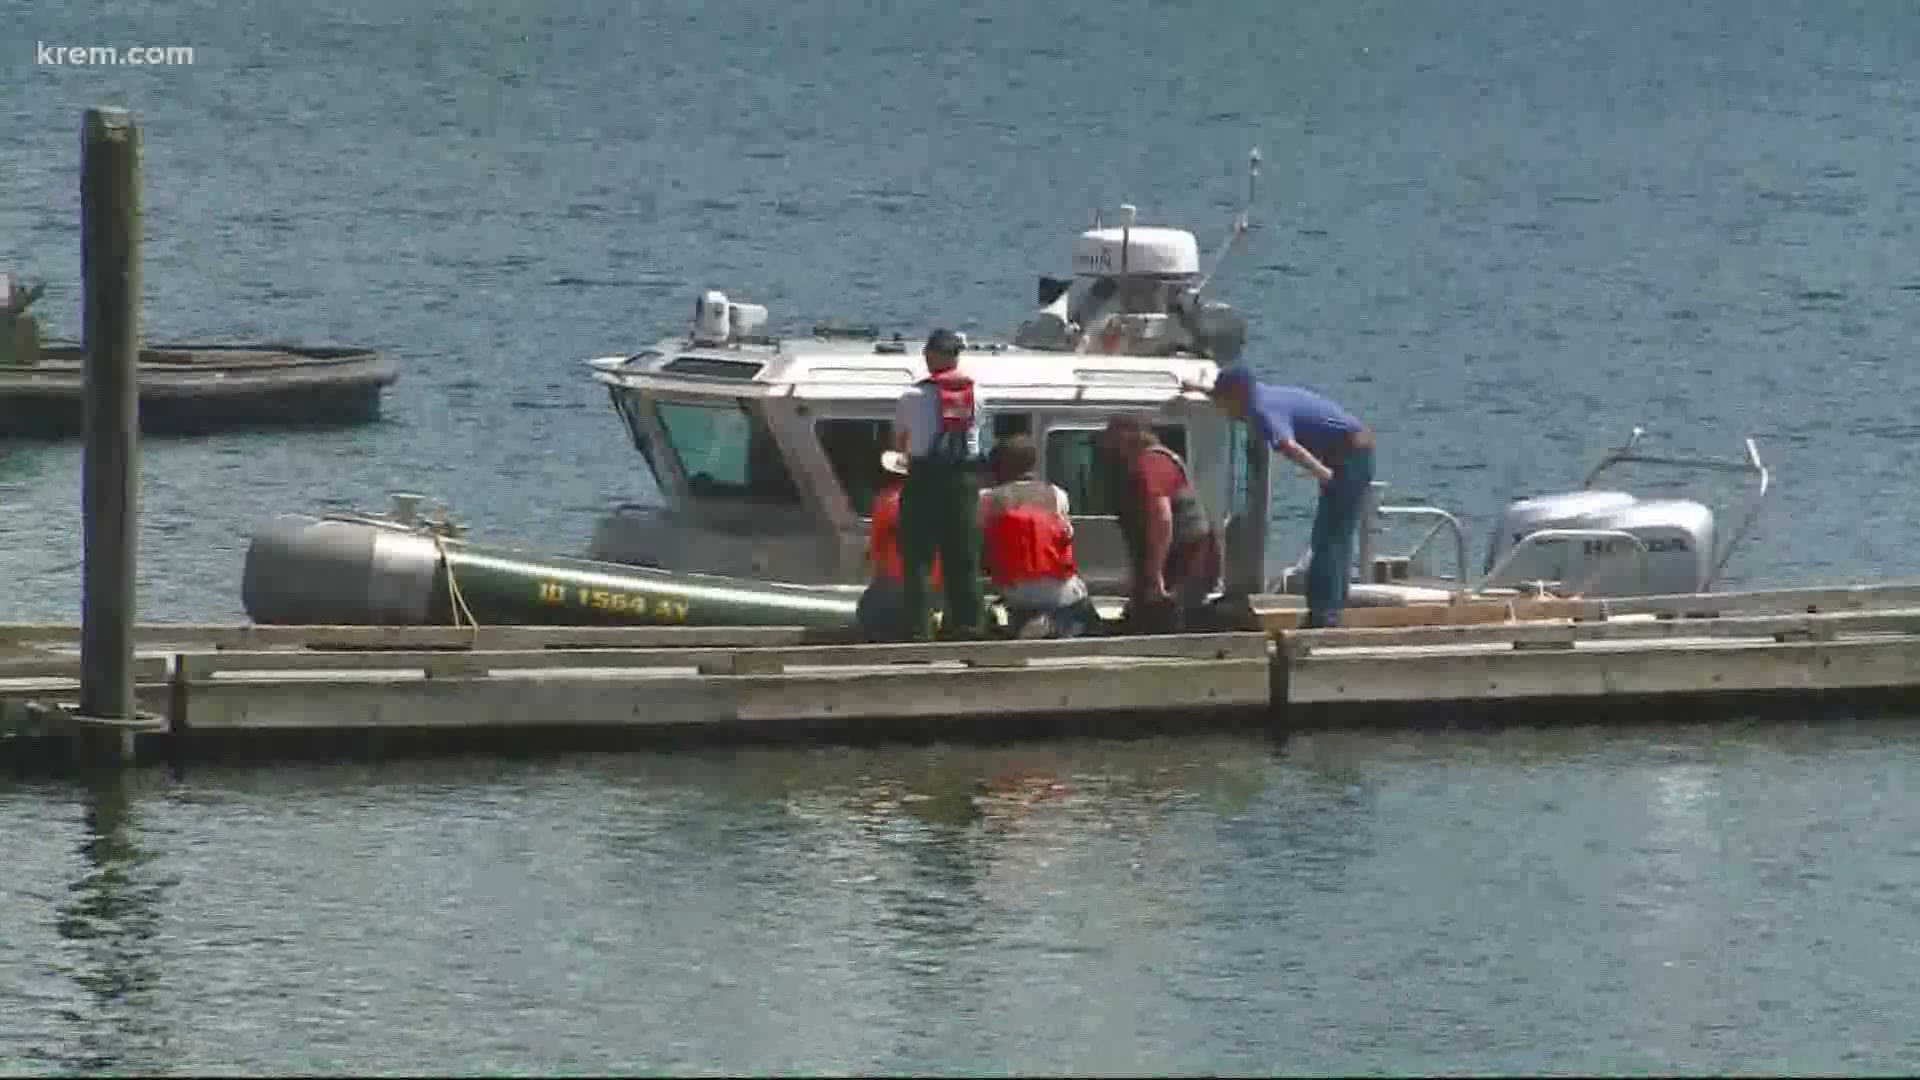 Eight people are dead after a plane crash over Lake Coeur d'Alene on Sunday. The Kootenai County Sheriff's Office found the last two victims on Wednesday.